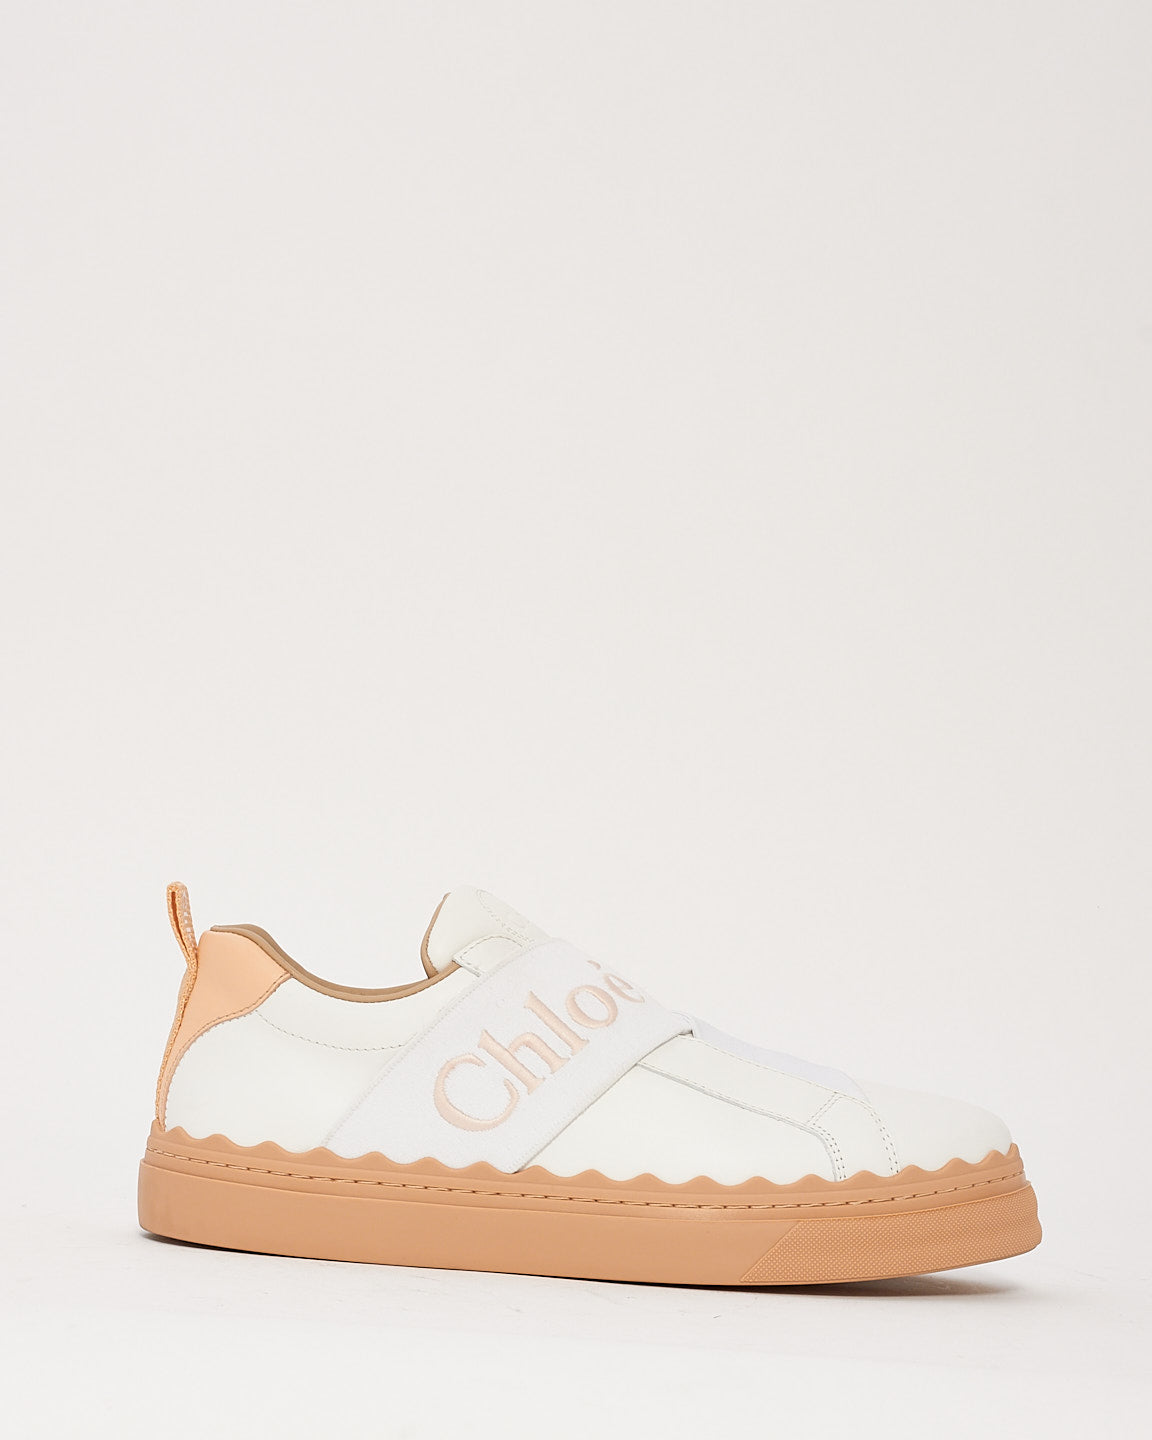 Chloé White Leather Lauren Low Top Sneakers - 39